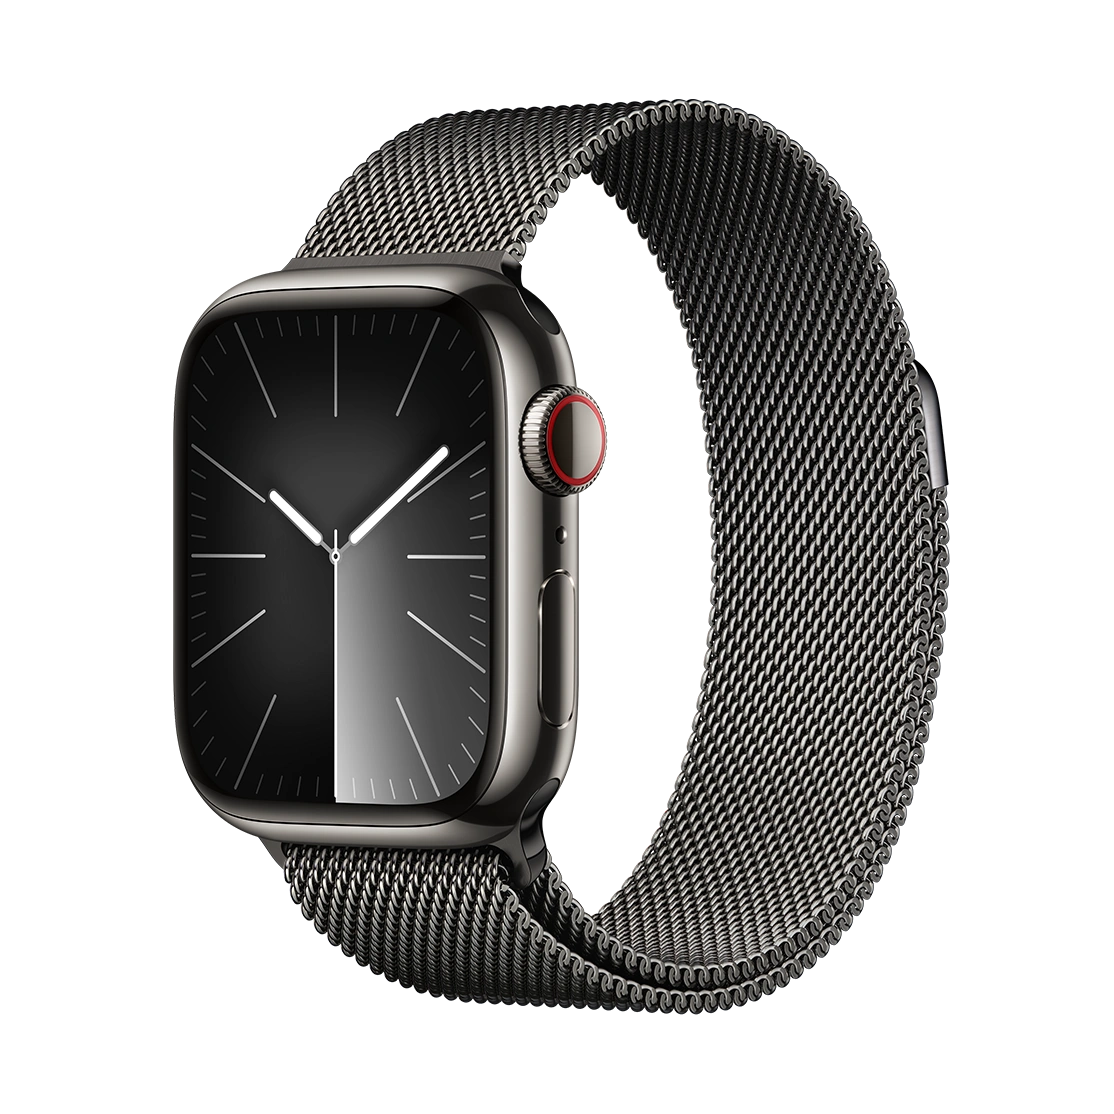  Apple Watch Series 9 Graphite Stainless Steel Case with Milanese Loop band